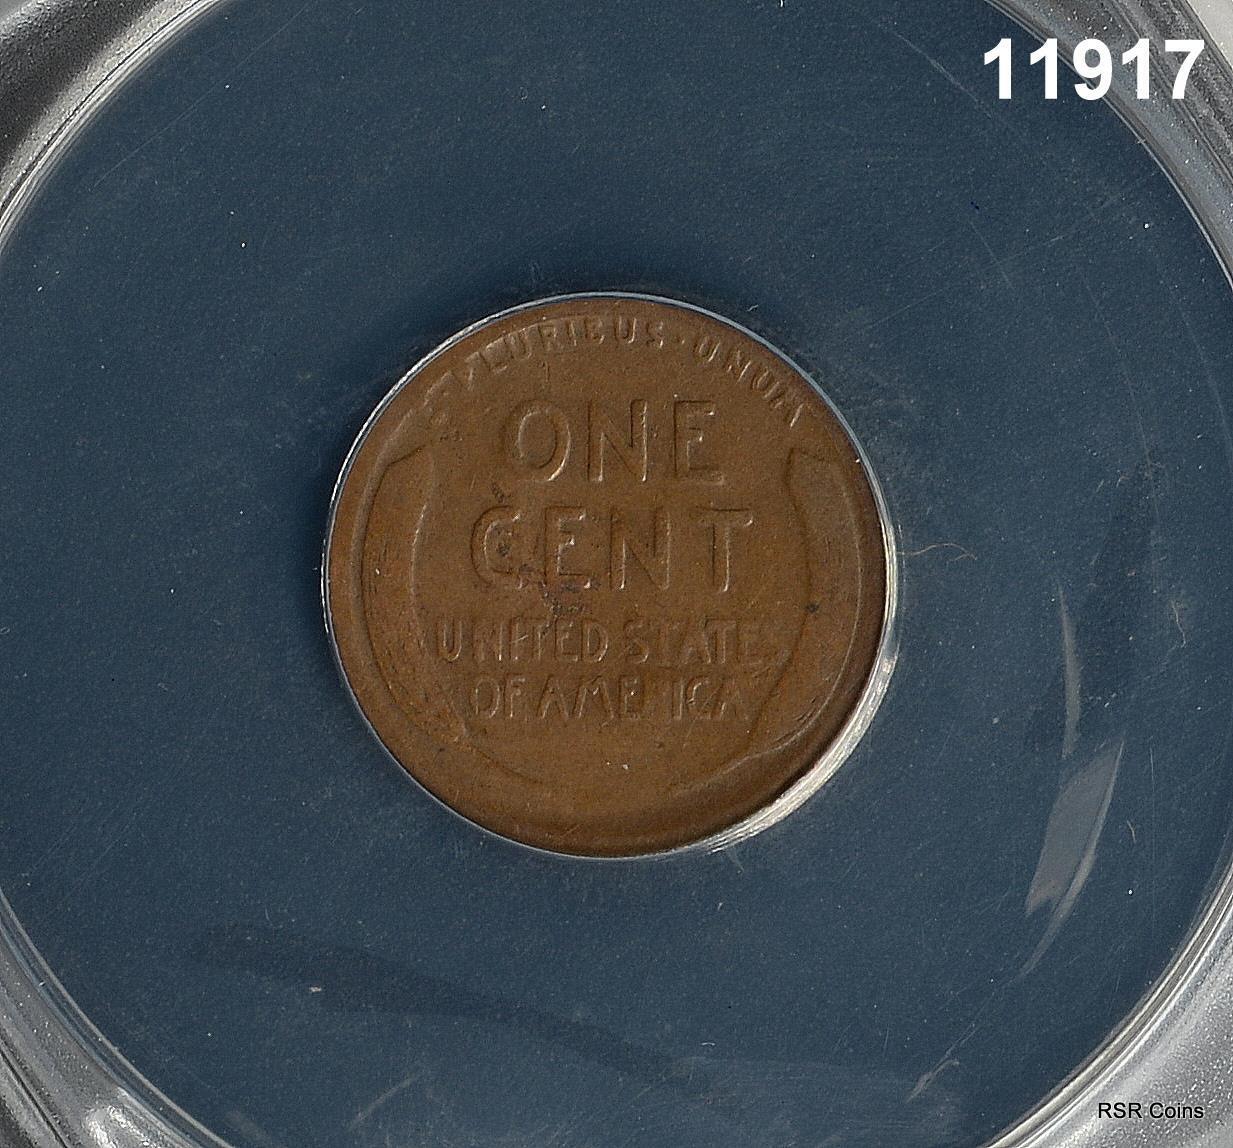 1914 D LINCOLN CENT KEY DATE!! ANACS CERTIFIED VG 8 #11917